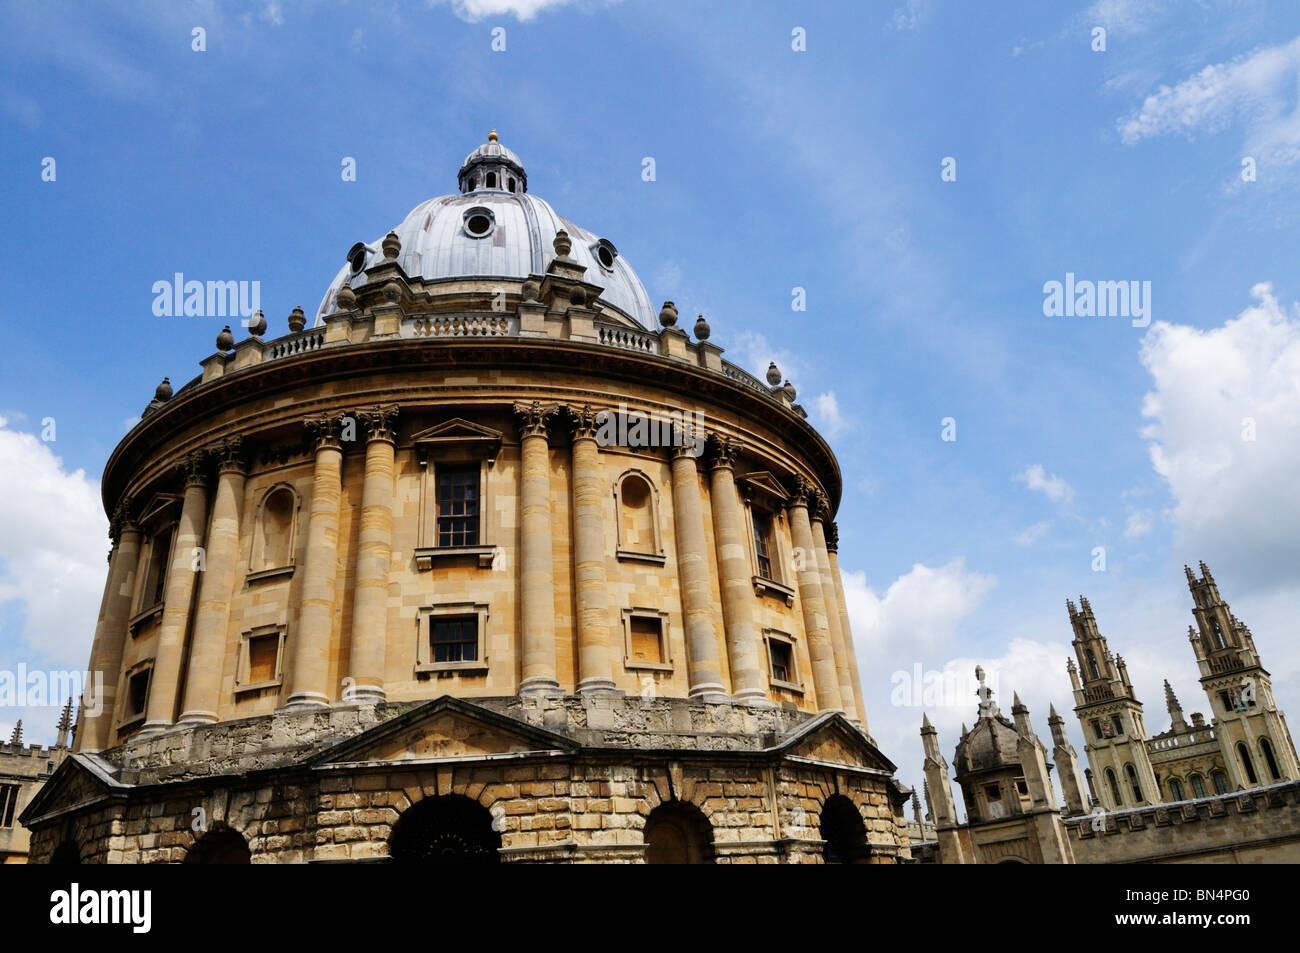 Radcliffe Camera with Spires of All Souls College, Oxford, England, UK Stock Photo